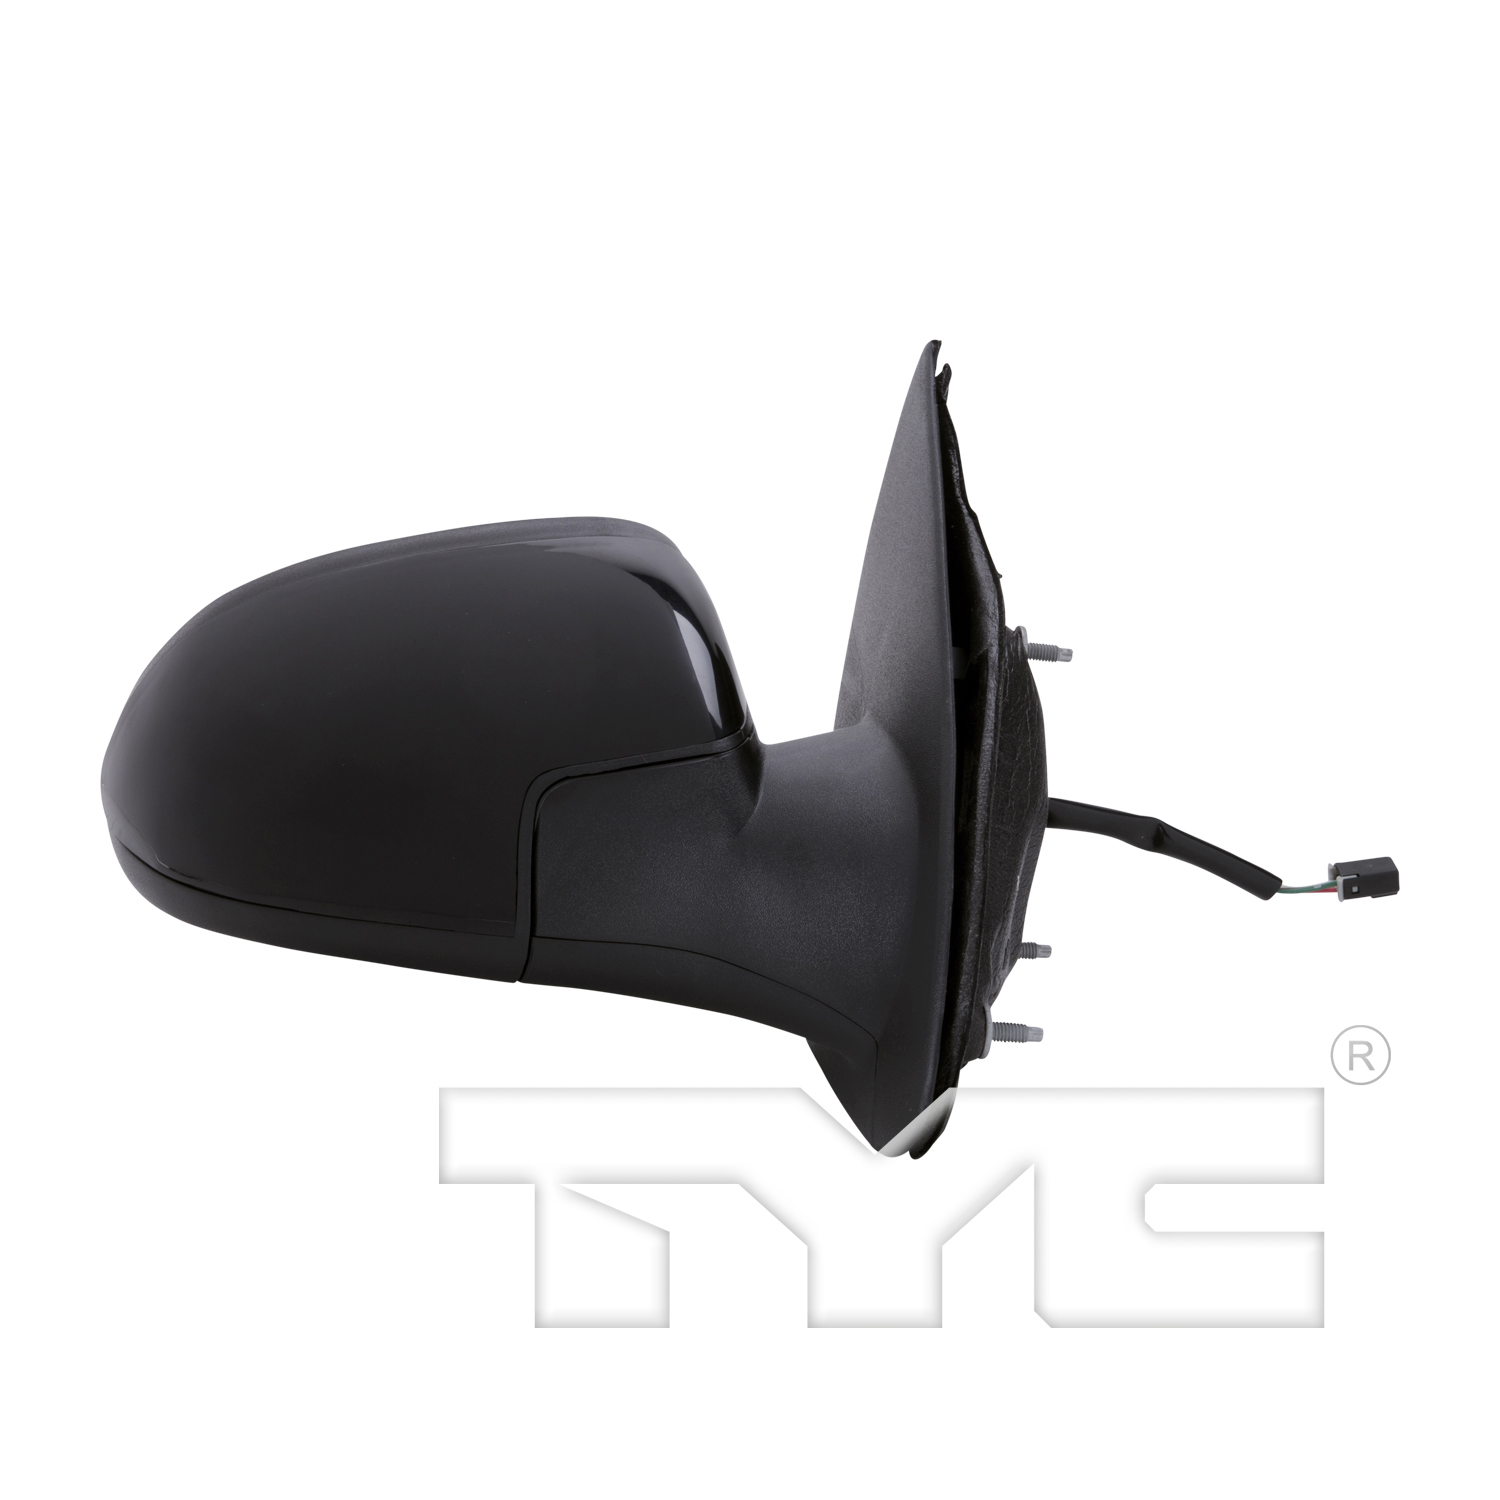 Aftermarket MIRRORS for CHEVROLET - COBALT, COBALT,05-10,RT Mirror outside rear view